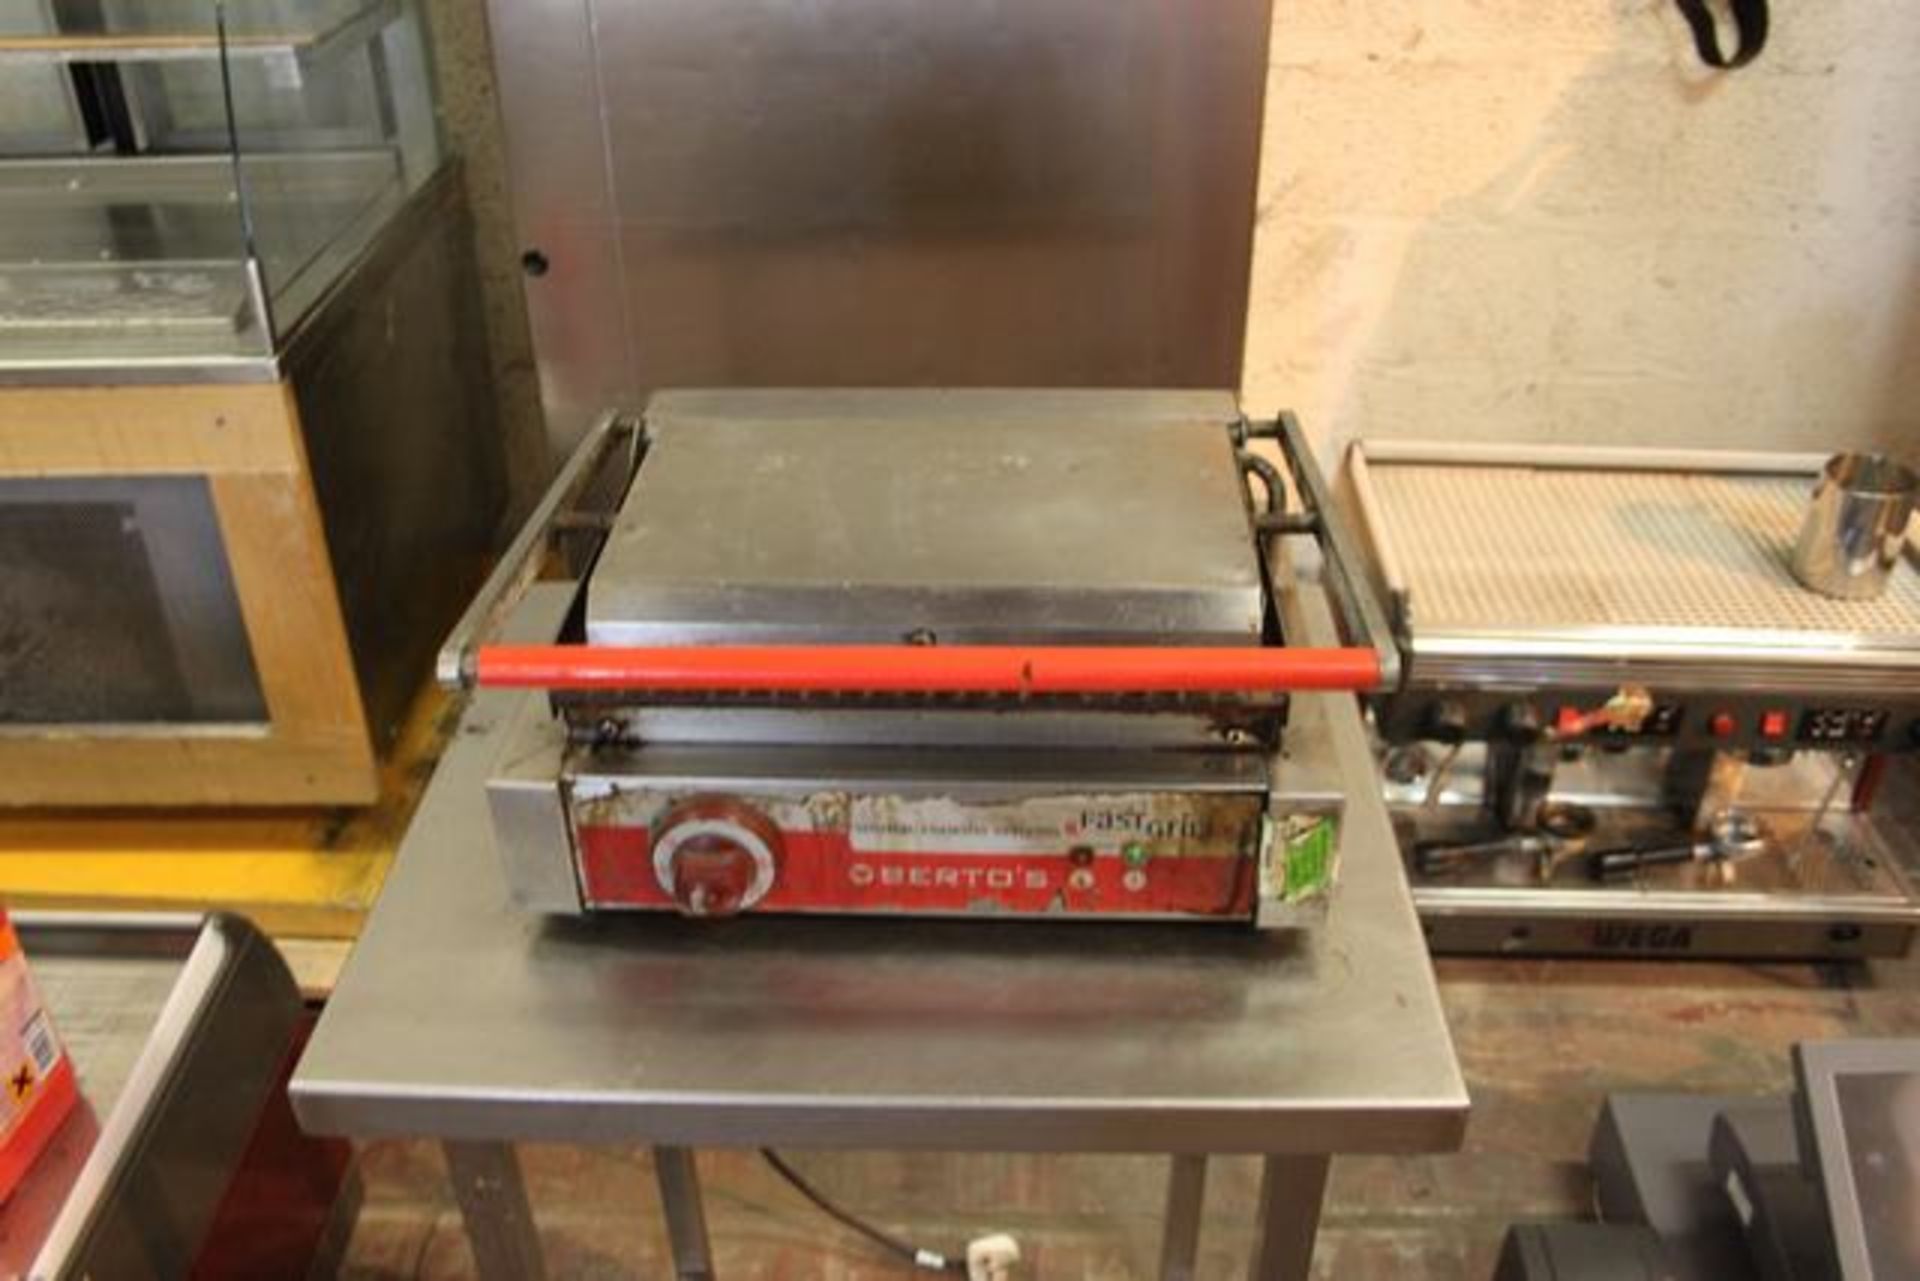 Bertos PMR/ST contact grill ridged top and bottom plate 1320mm work surface maximum temperature